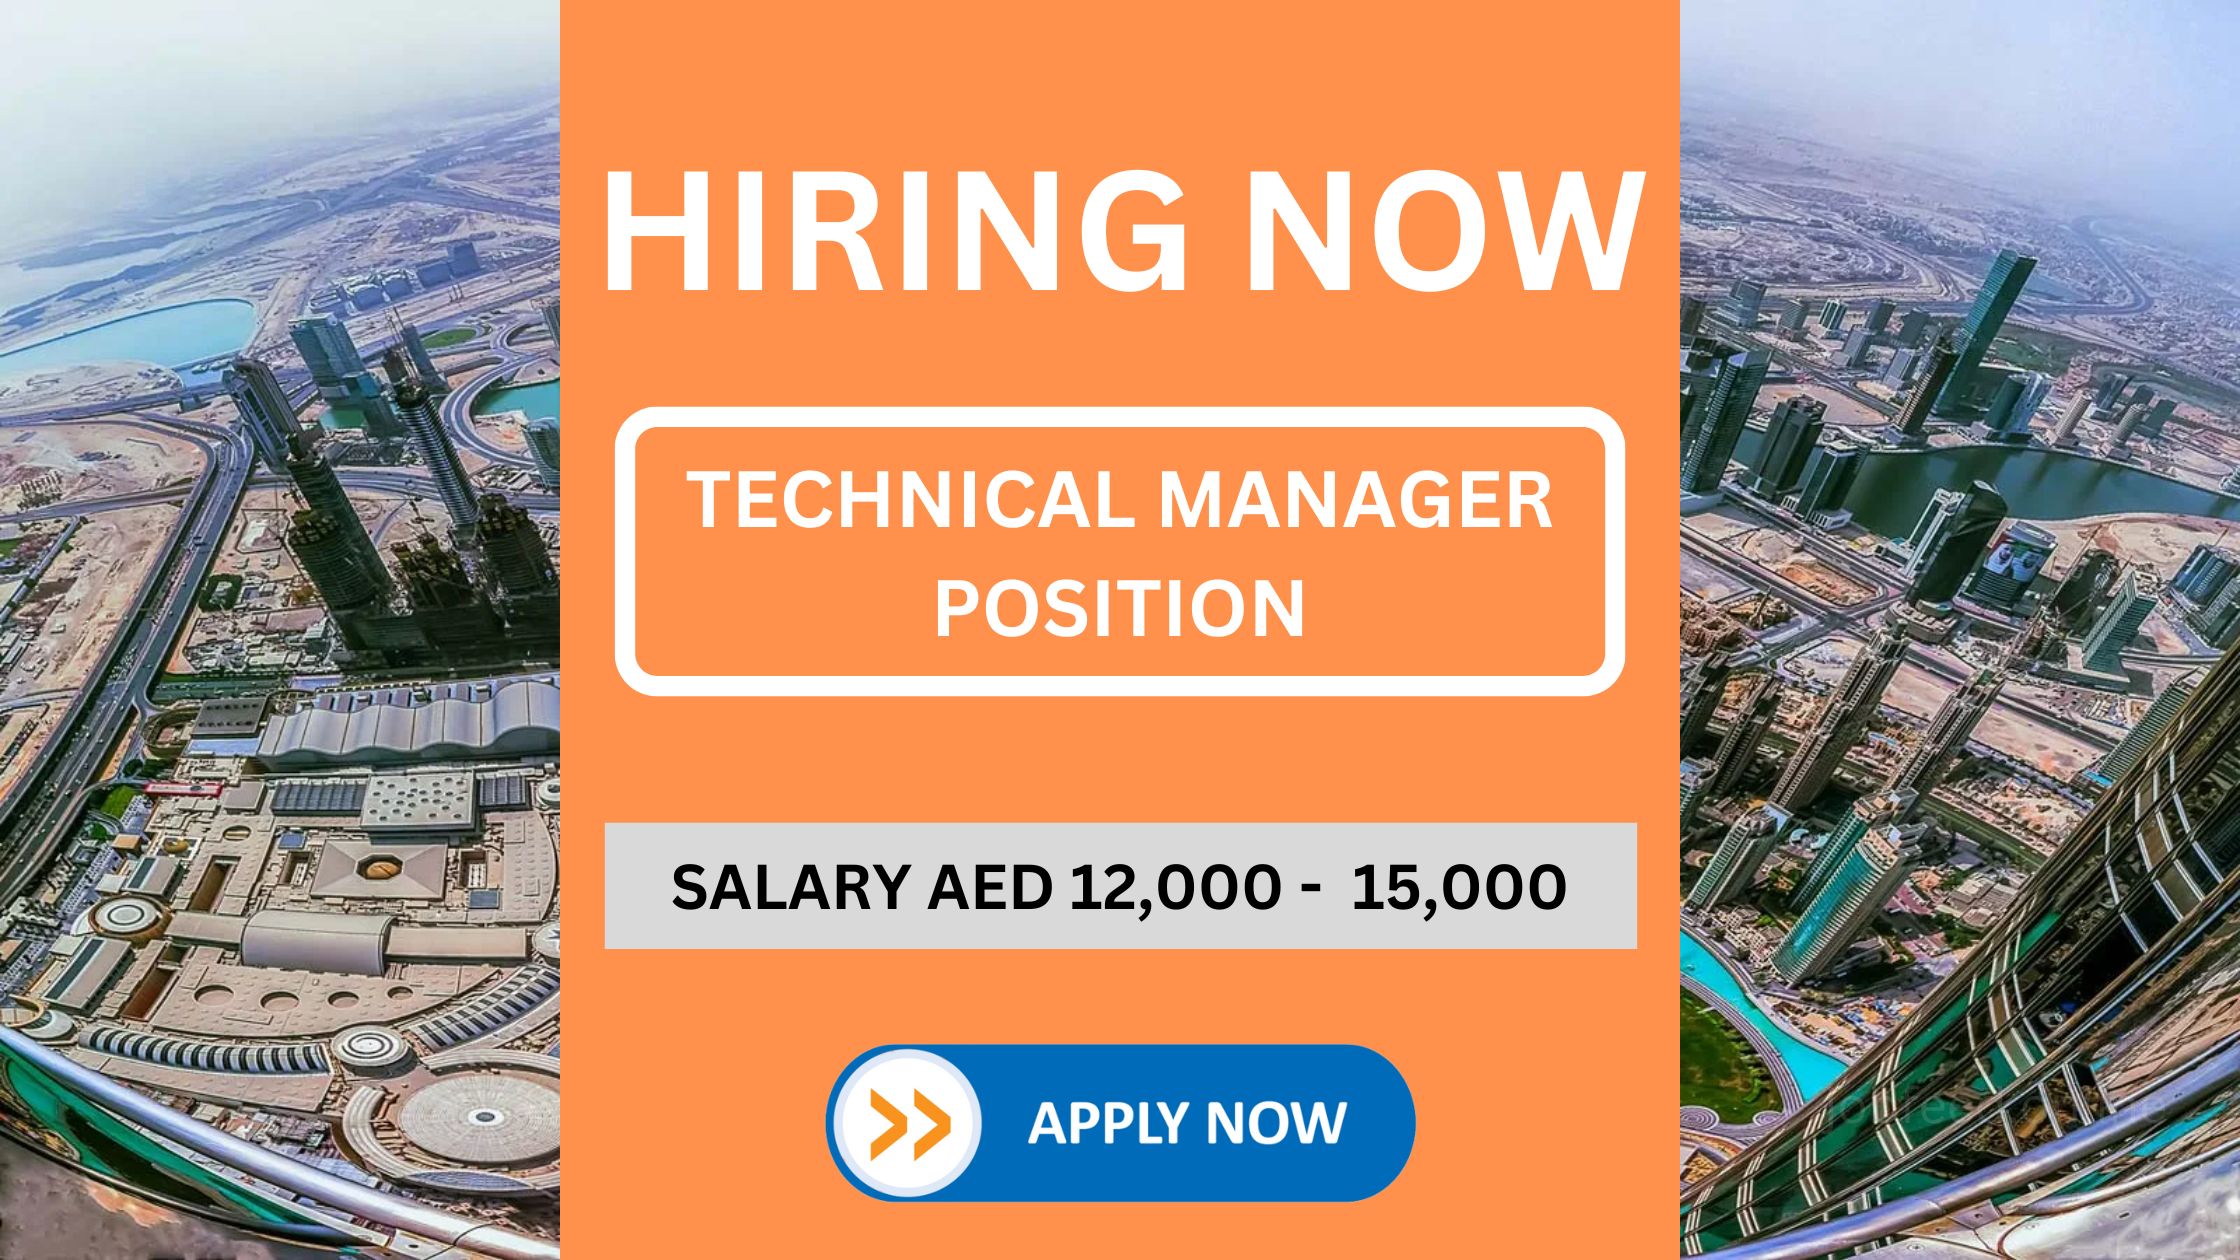 Salary AED 12,000 - AED 15,000: Technical Manager Position